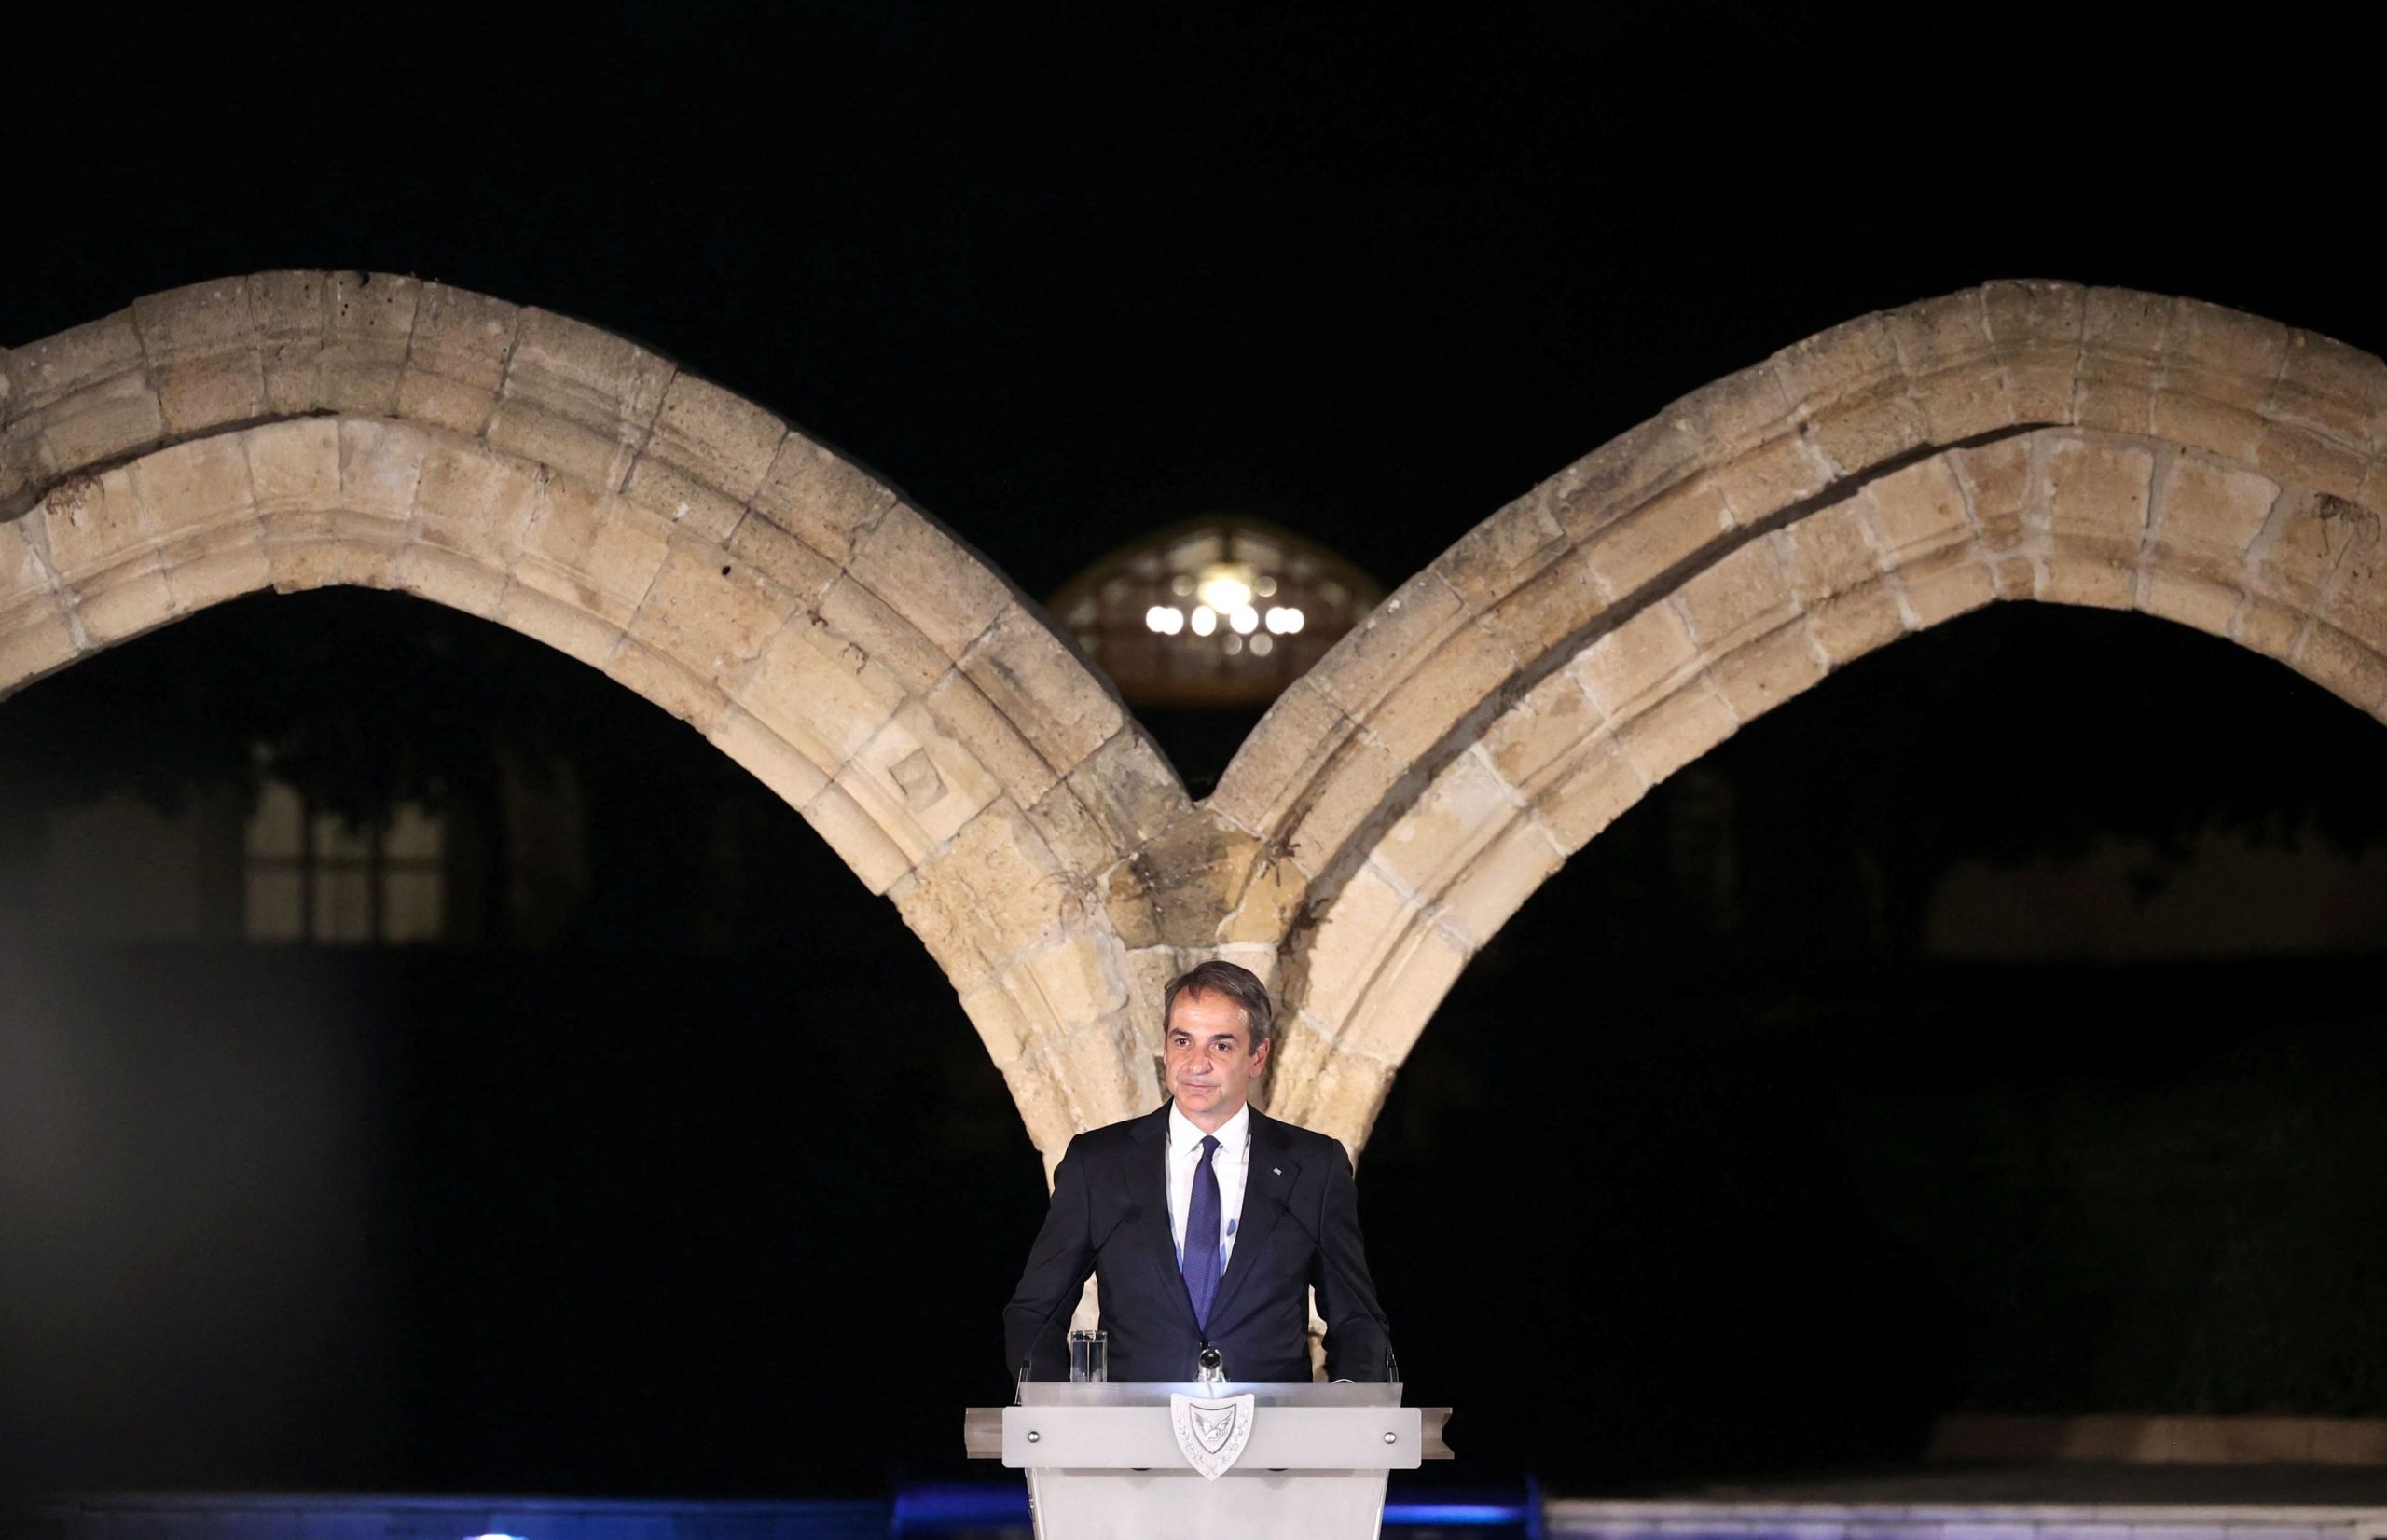 Mitsotakis: It makes no sense for Cyprus, an EU member, to remain divided